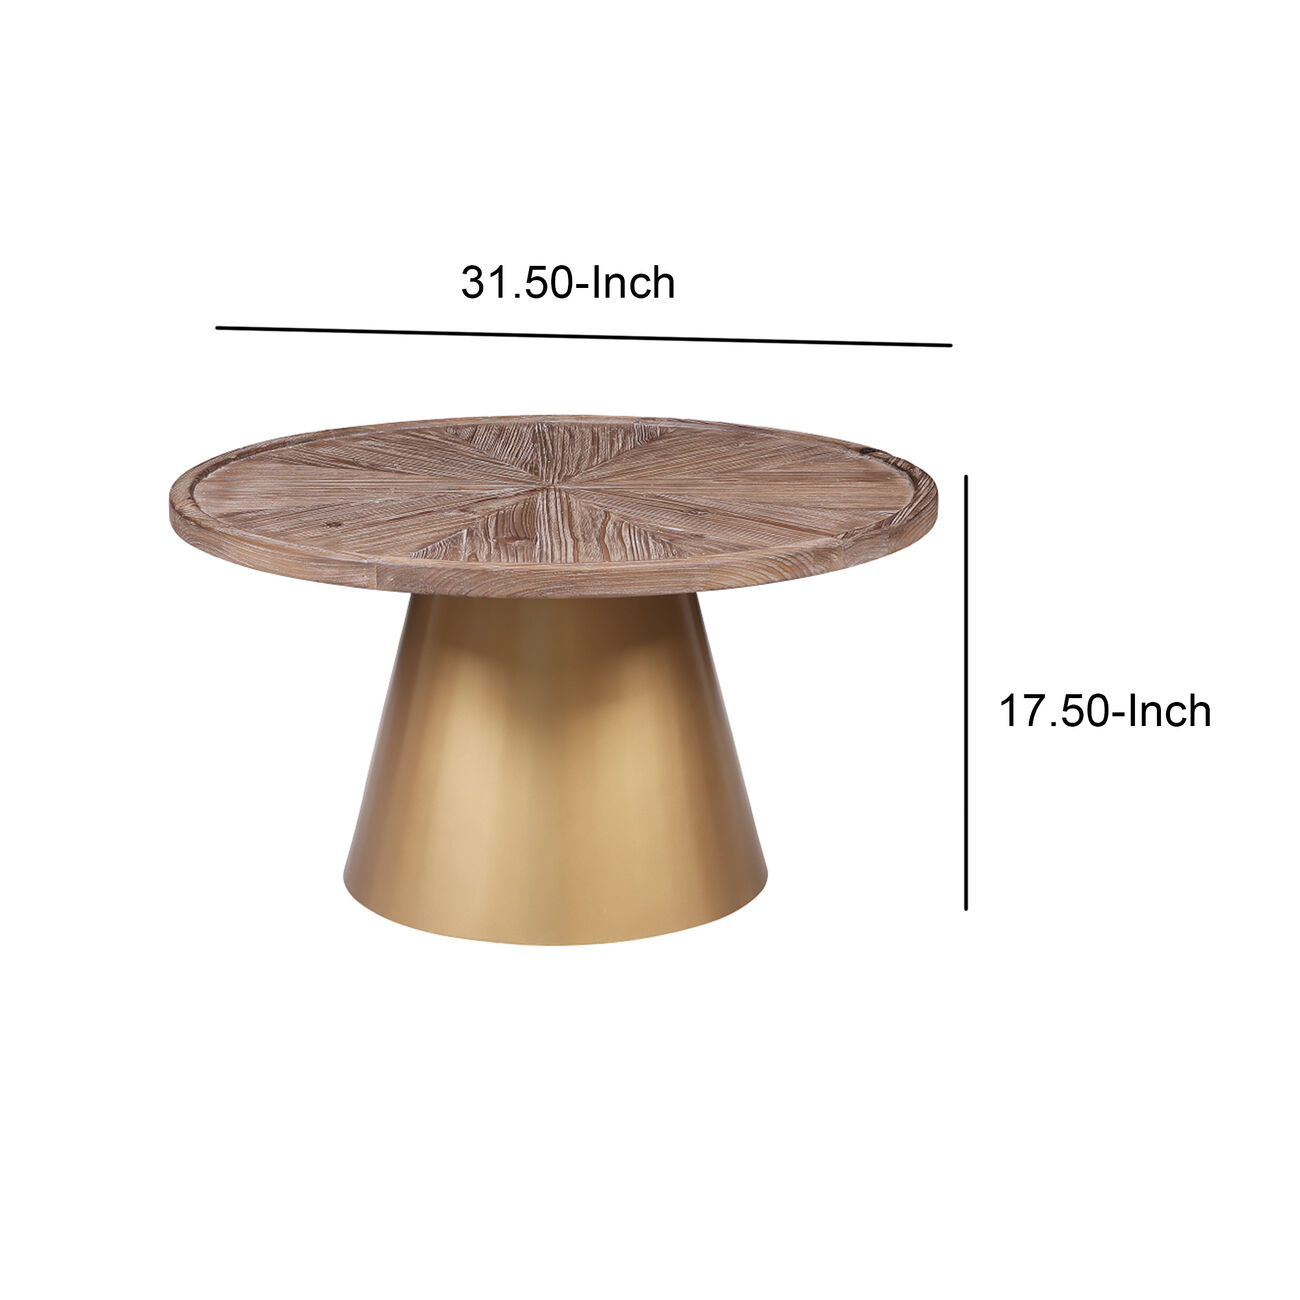 Round Wooden Top Coffee Table with Metal Conical Base, Brown and Gold